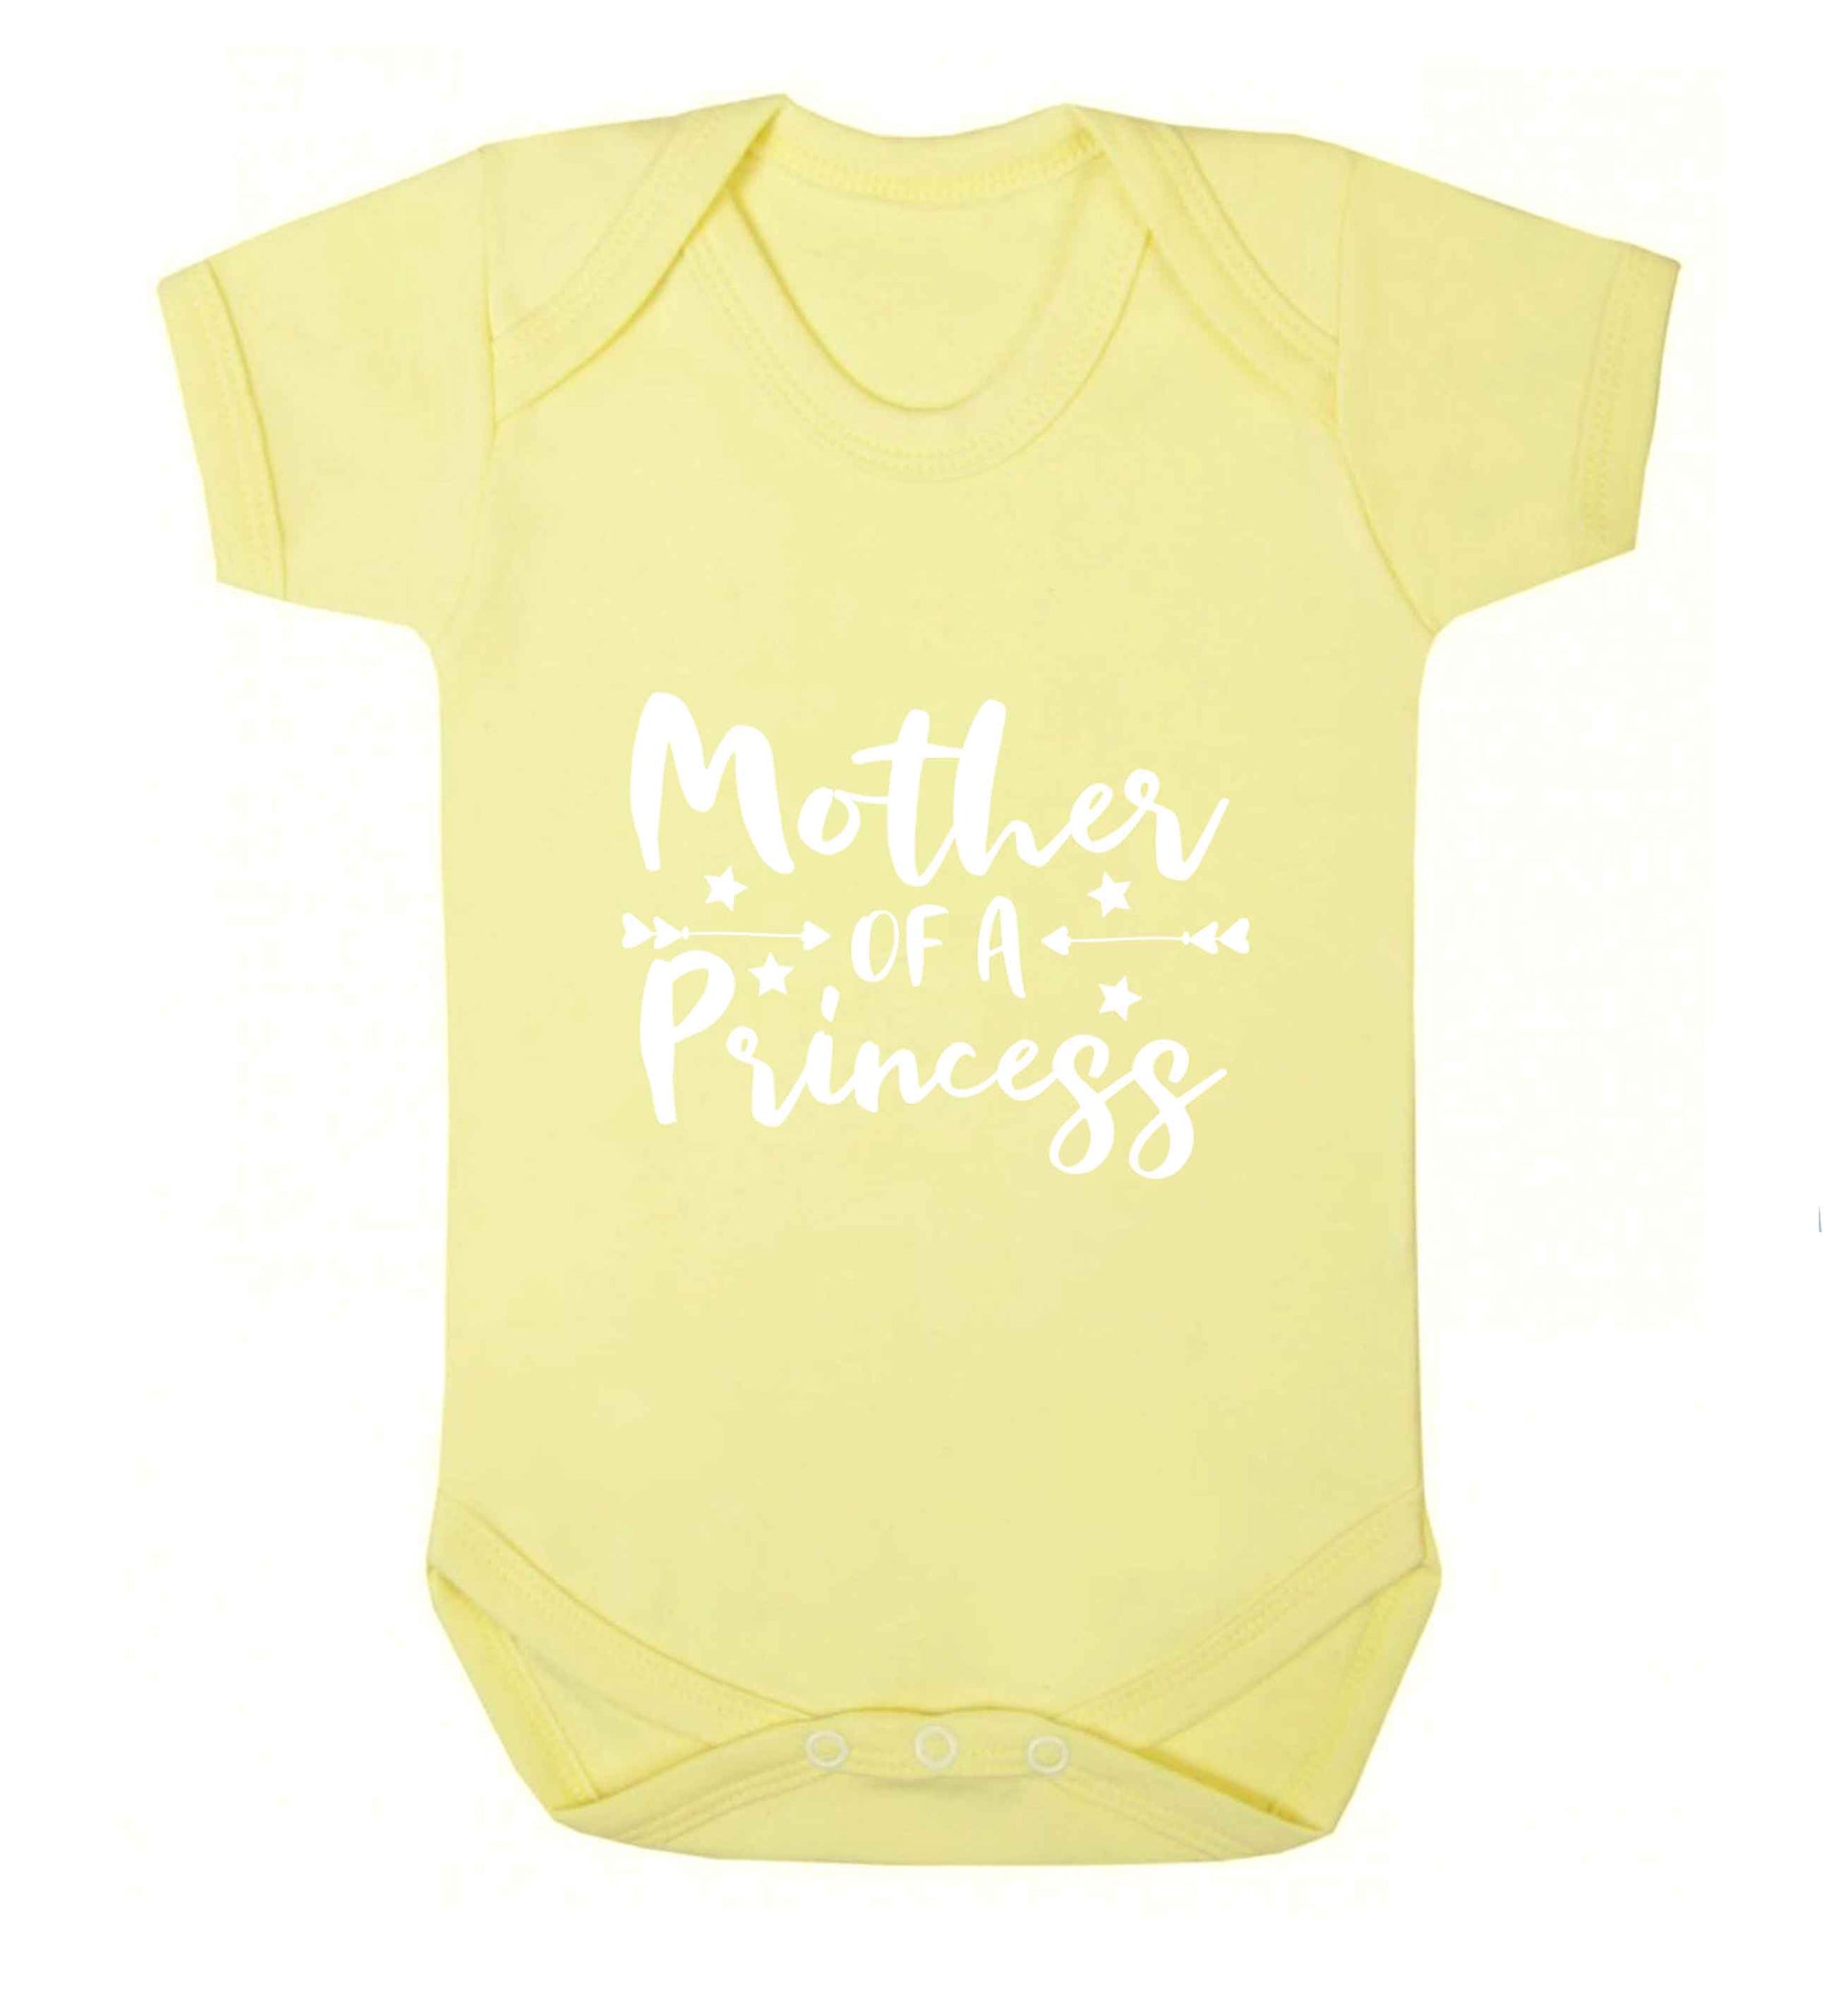 Mother of a princess baby vest pale yellow 18-24 months